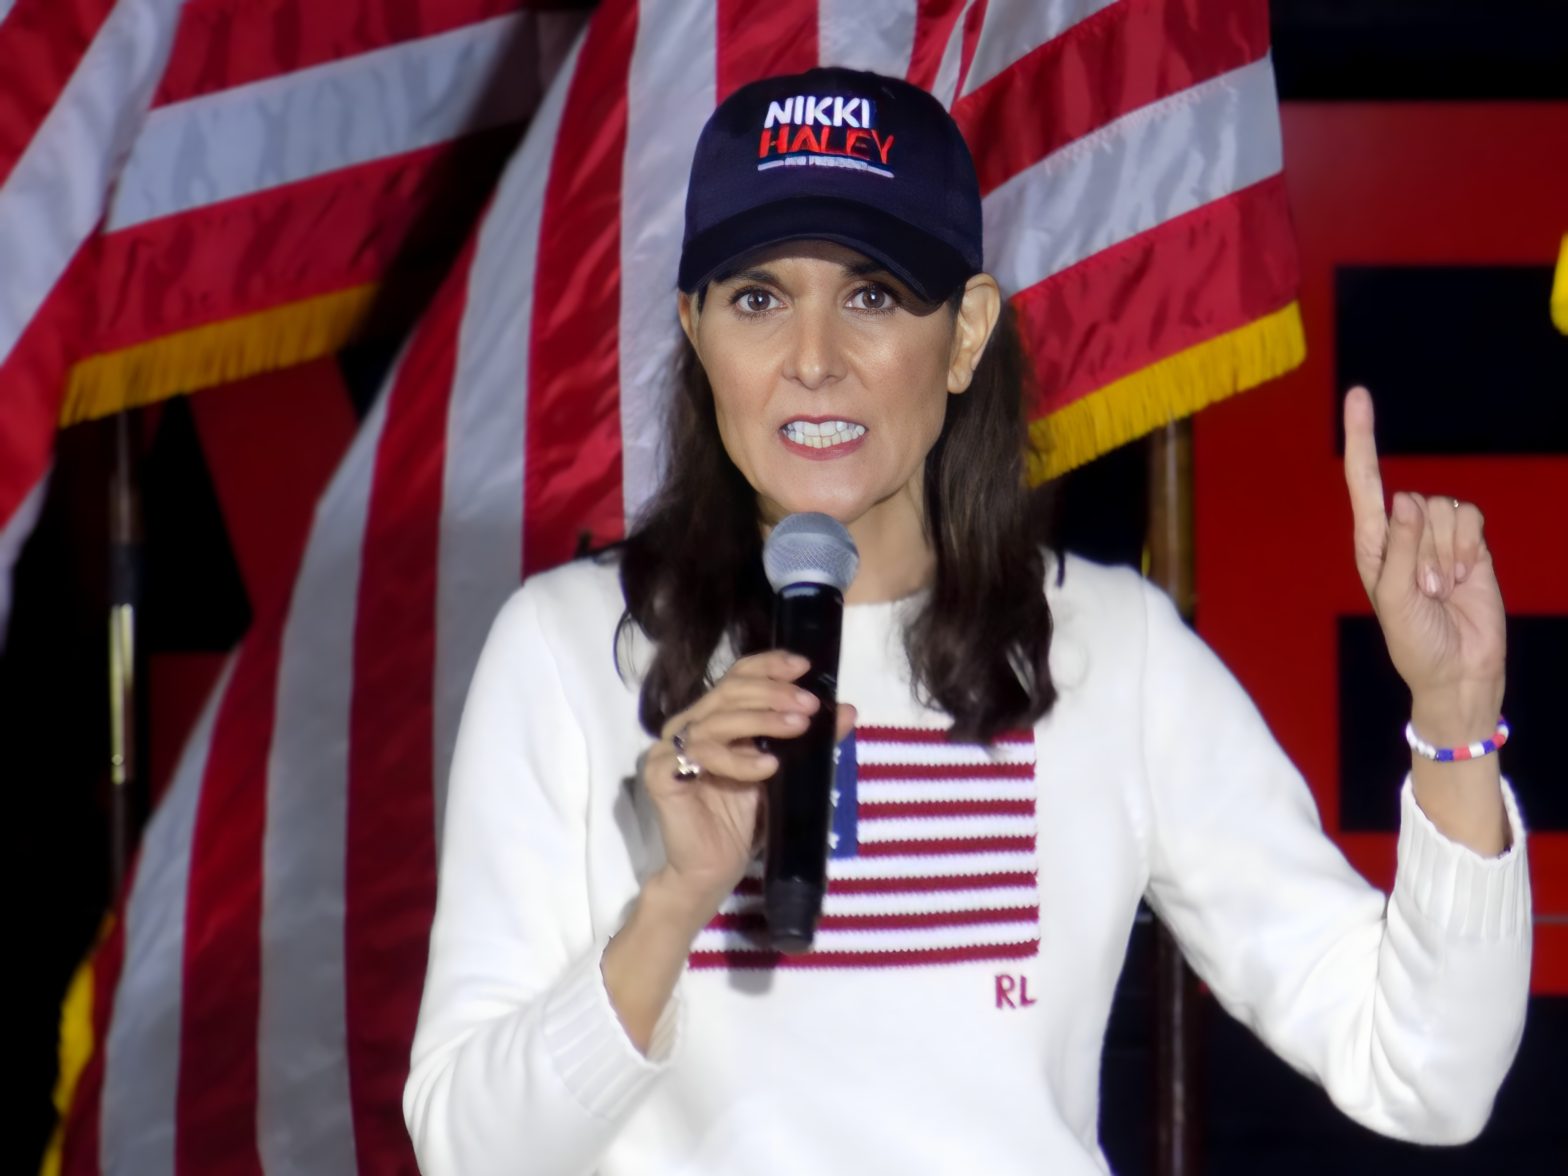 Haley Wins First Primary While Trump Notches Three More Contests